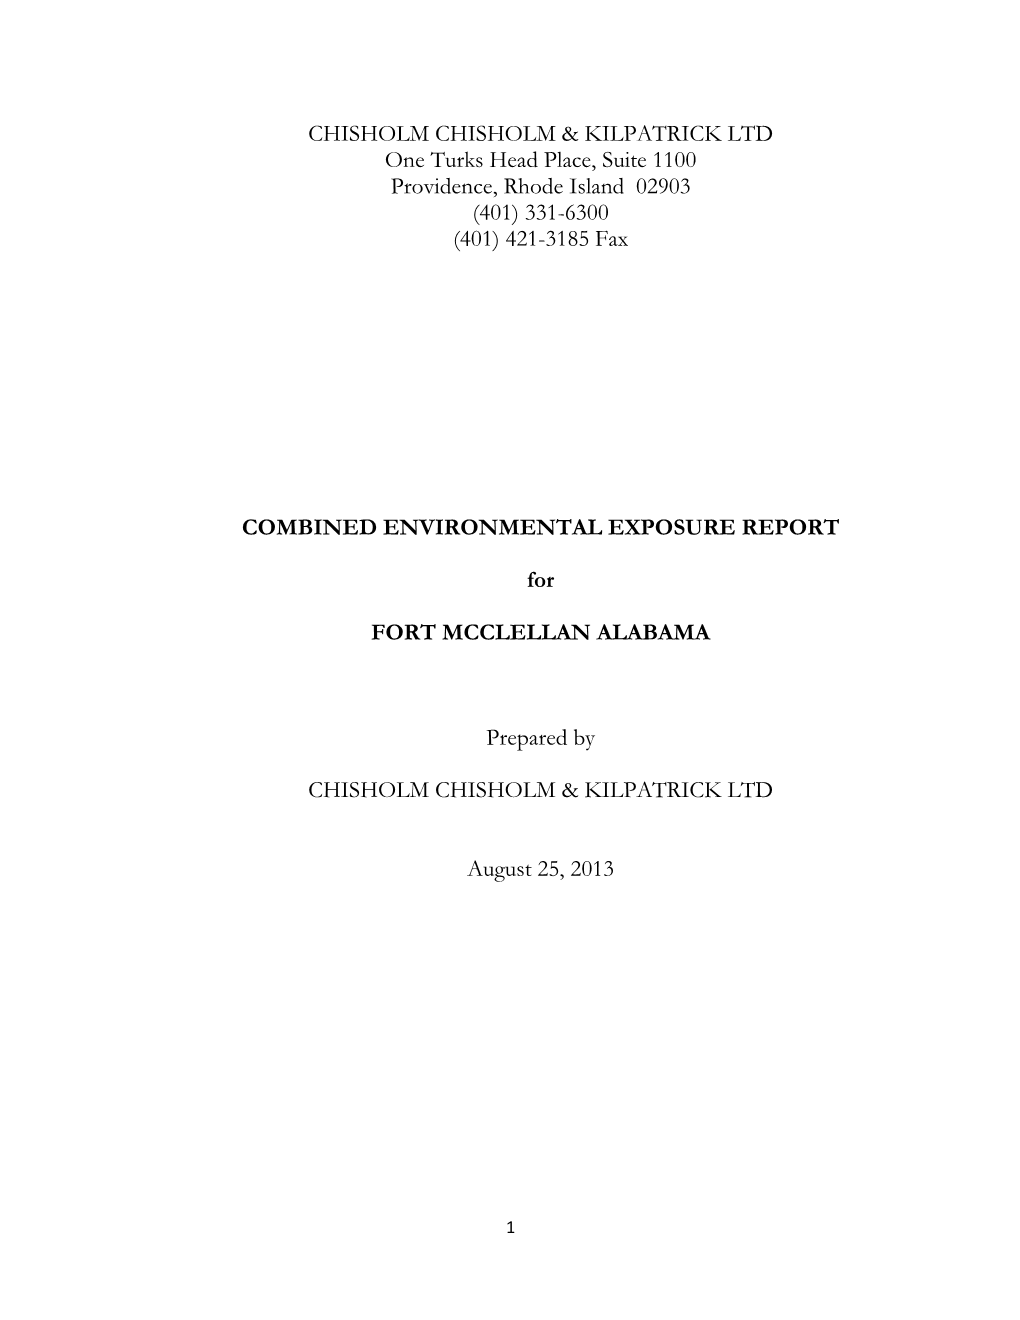 COMBINED ENVIRONMENTAL EXPOSURE REPORT For